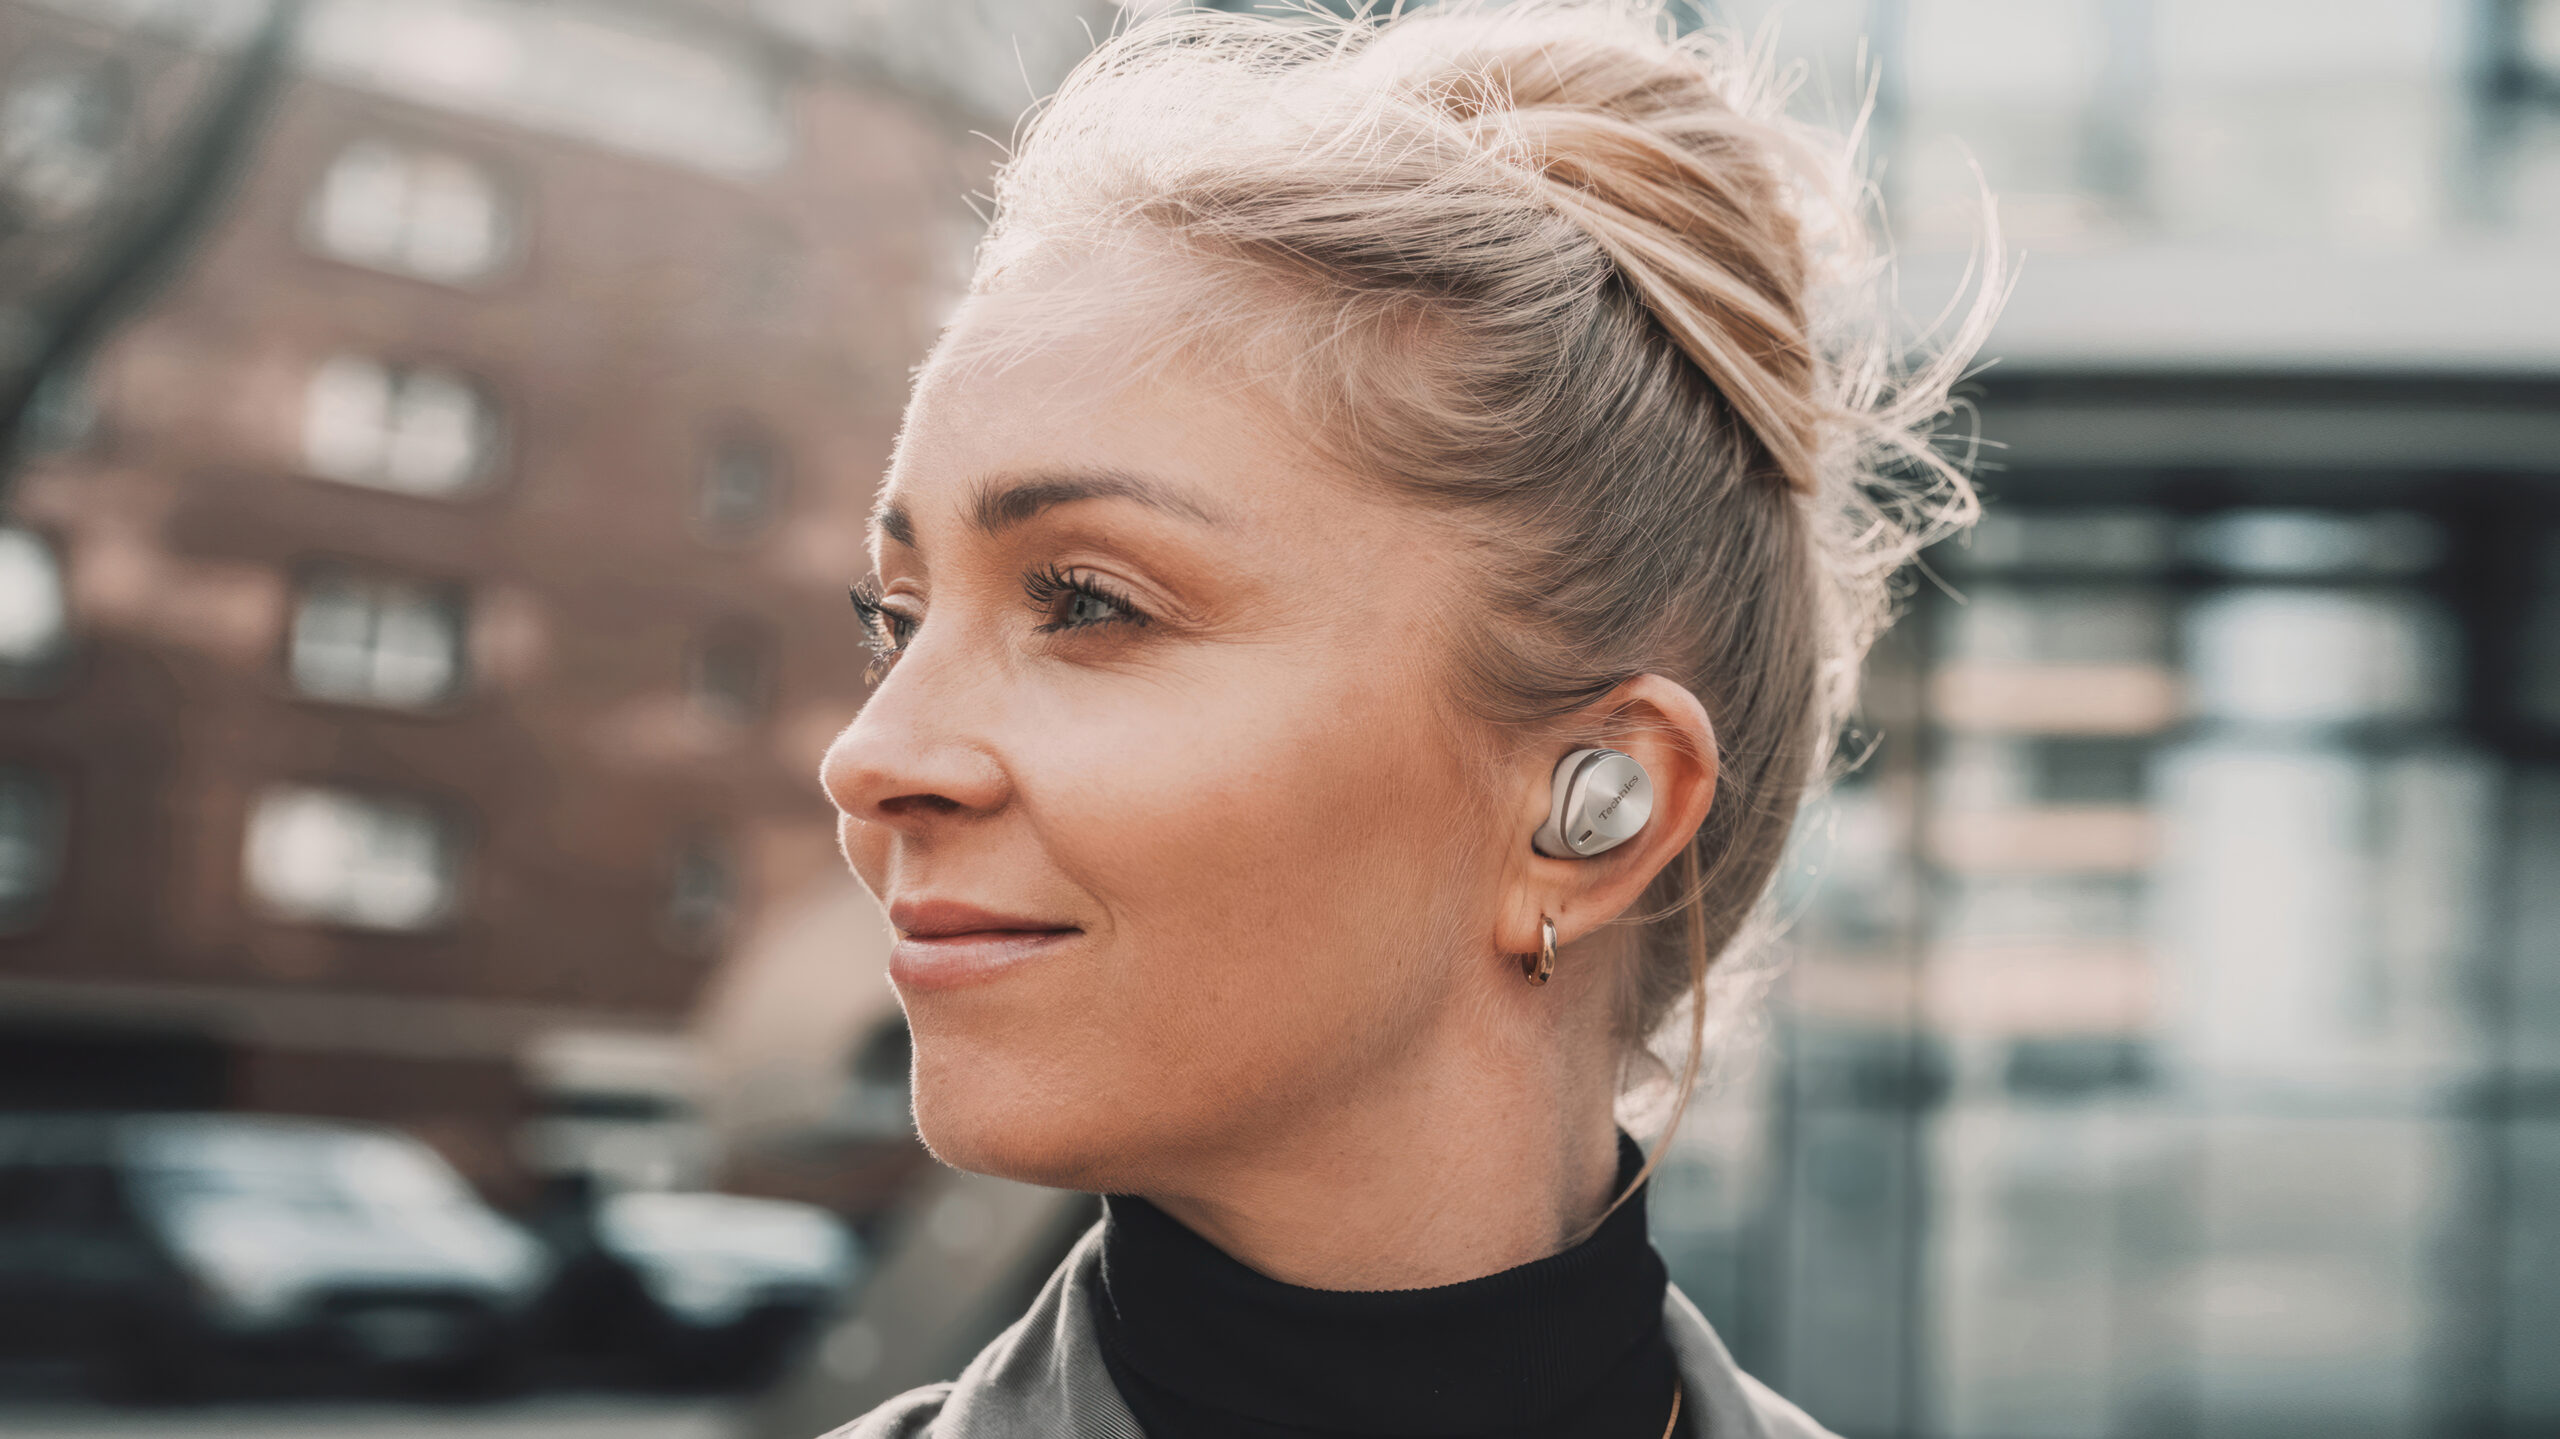 Buisness Woman outside with earbuds AZ80 by Technics